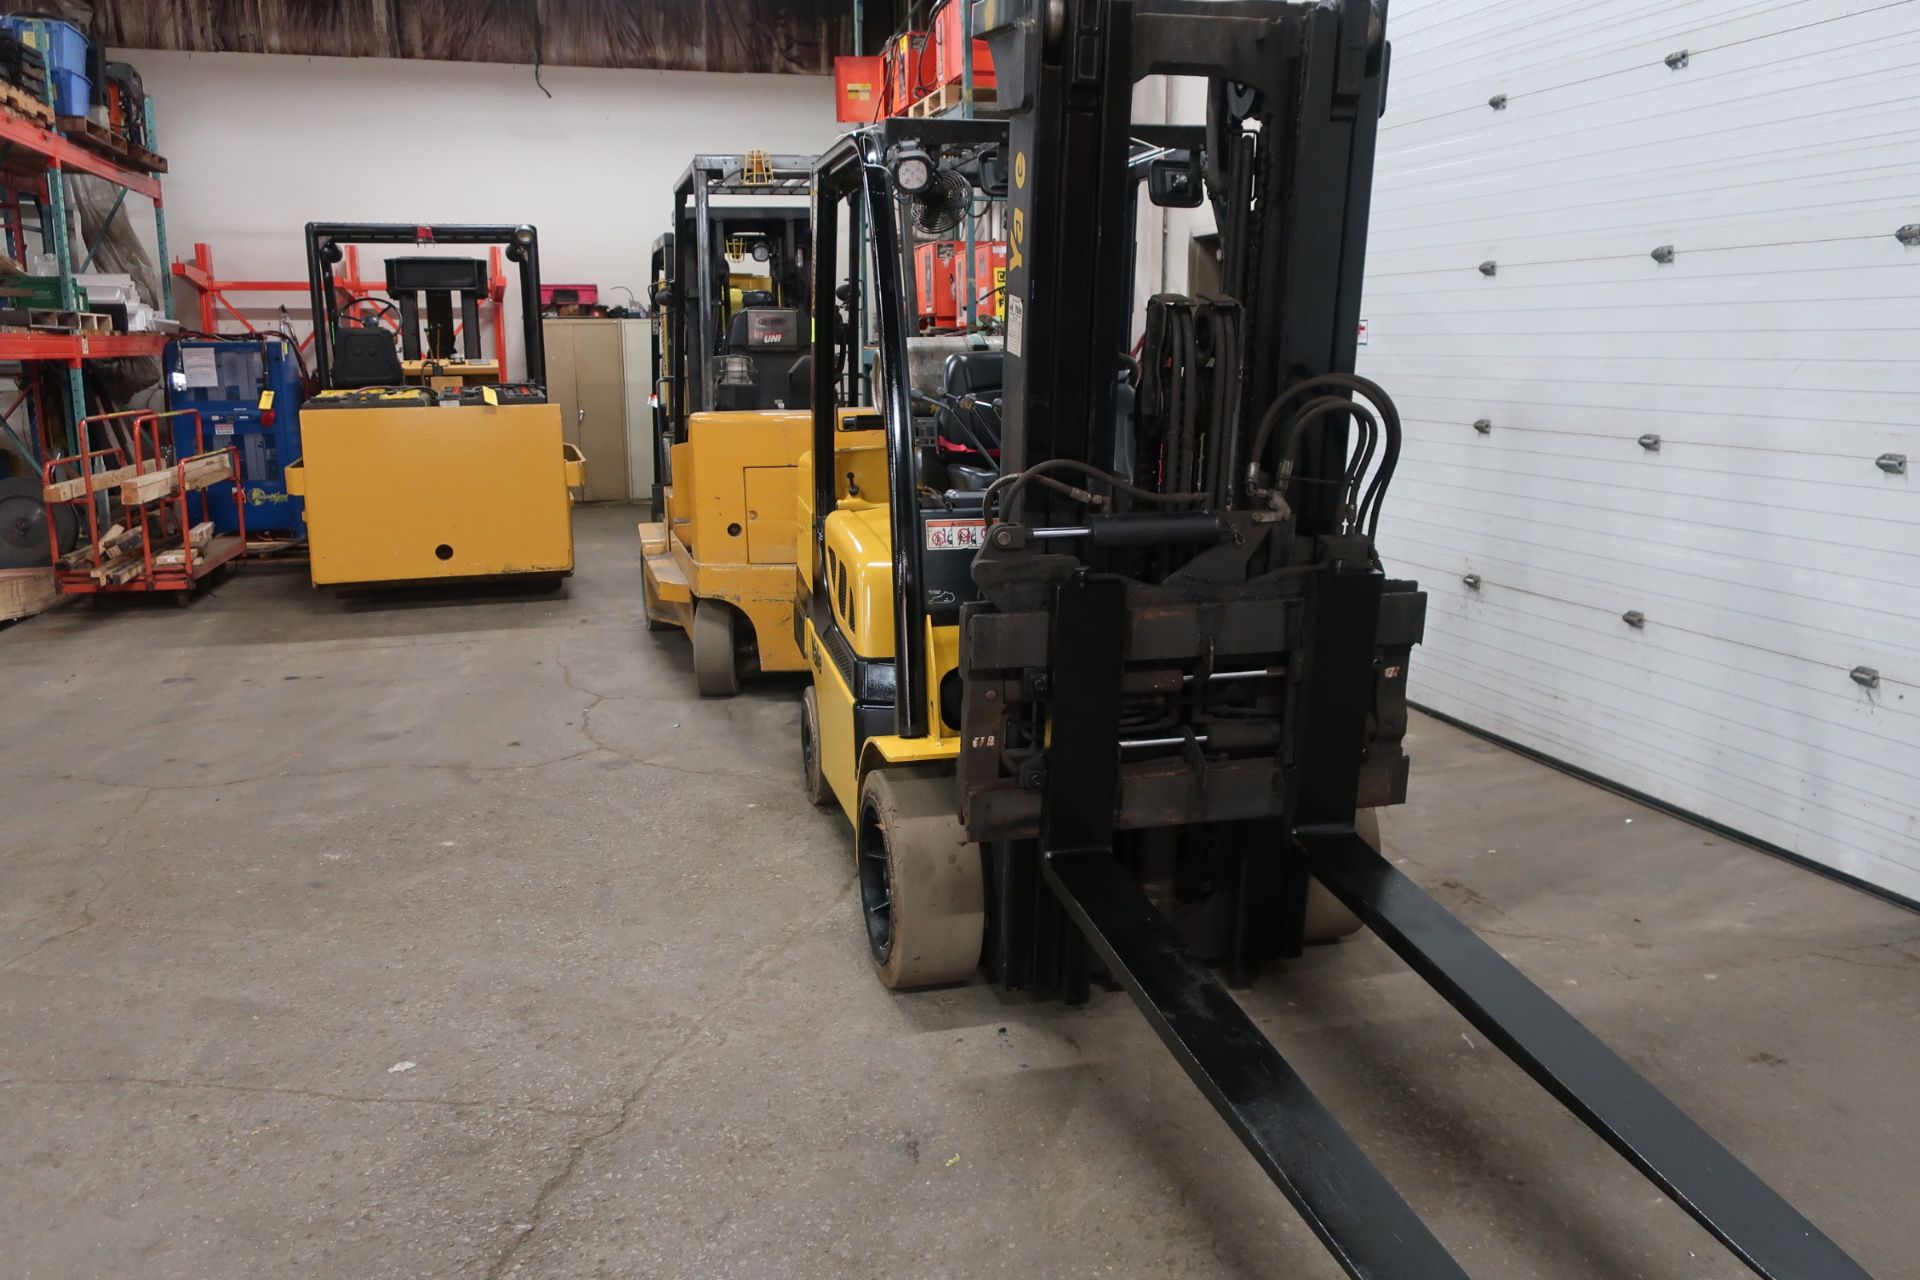 FREE CUSTOMS - 2019 Yale 8000lbs Capacity Forklift with 3-stage mast - LPG (propane) with - Image 2 of 2